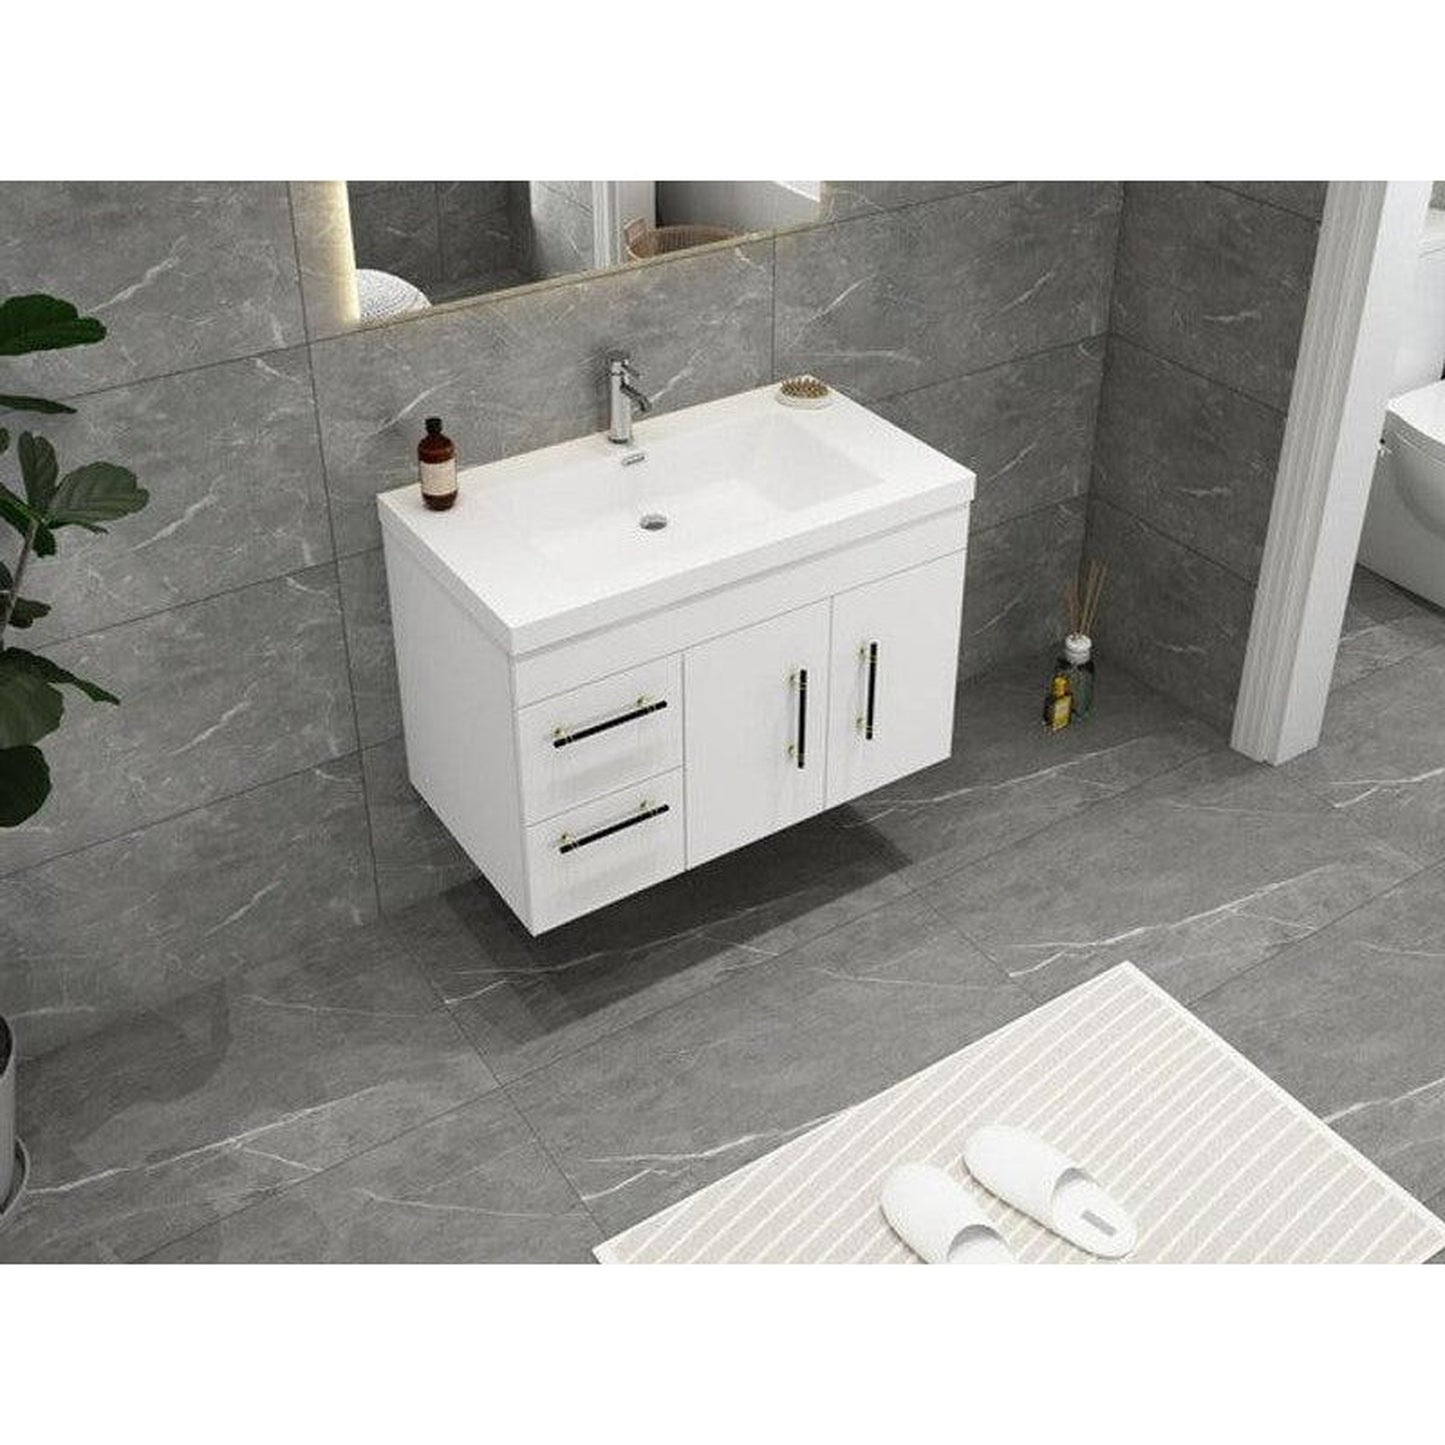 Moreno Bath ELSA 36" High Gloss White Wall-Mounted Vanity With Left Side Drawers and Single Reinforced White Acrylic Sink